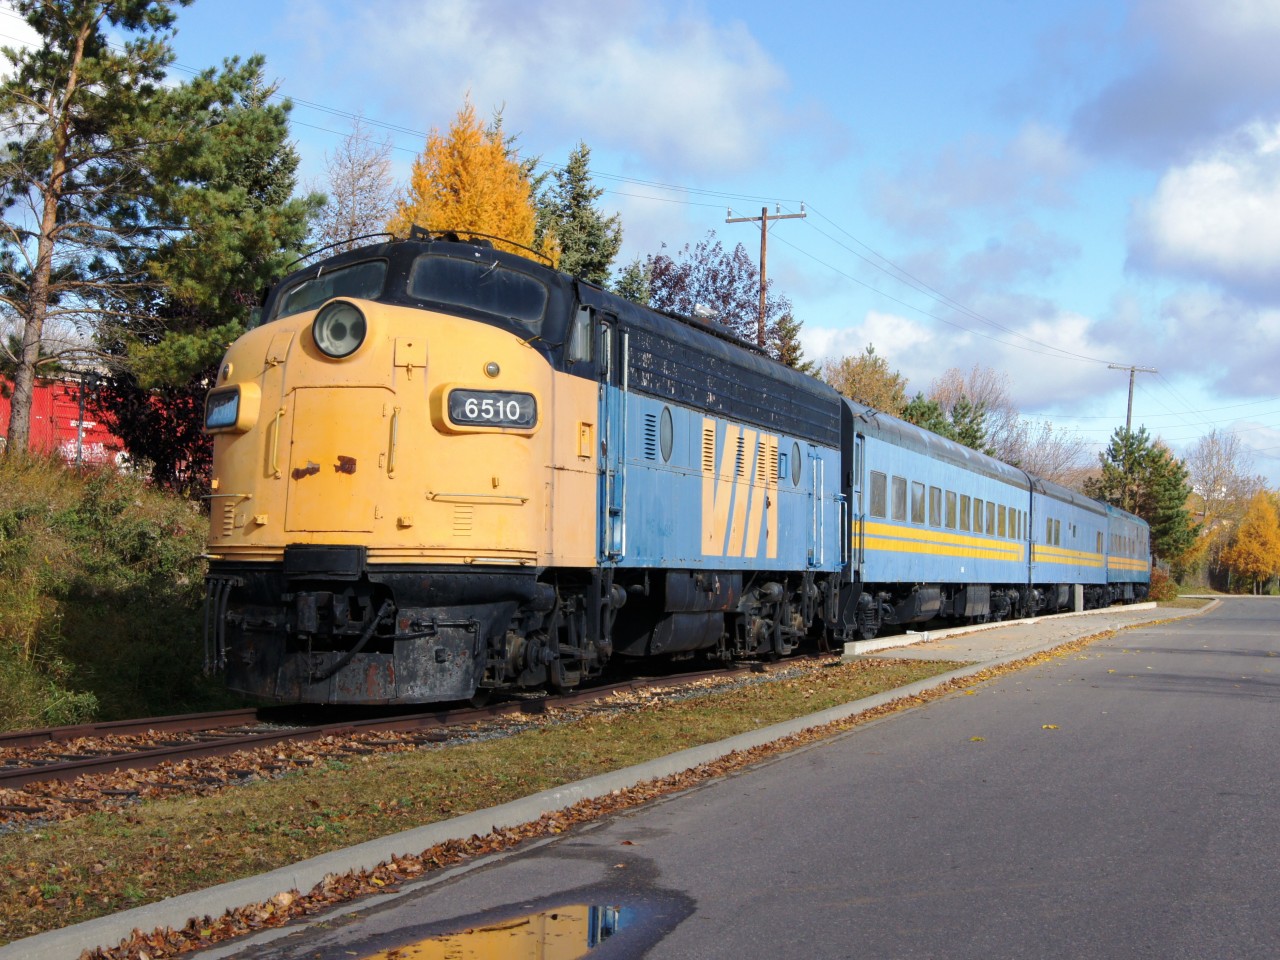 For a city without passenger rail, there is certainly quite a bit to see when it comes to VIA in Thunder Bay, including this static display next to the Kaministiquia River.